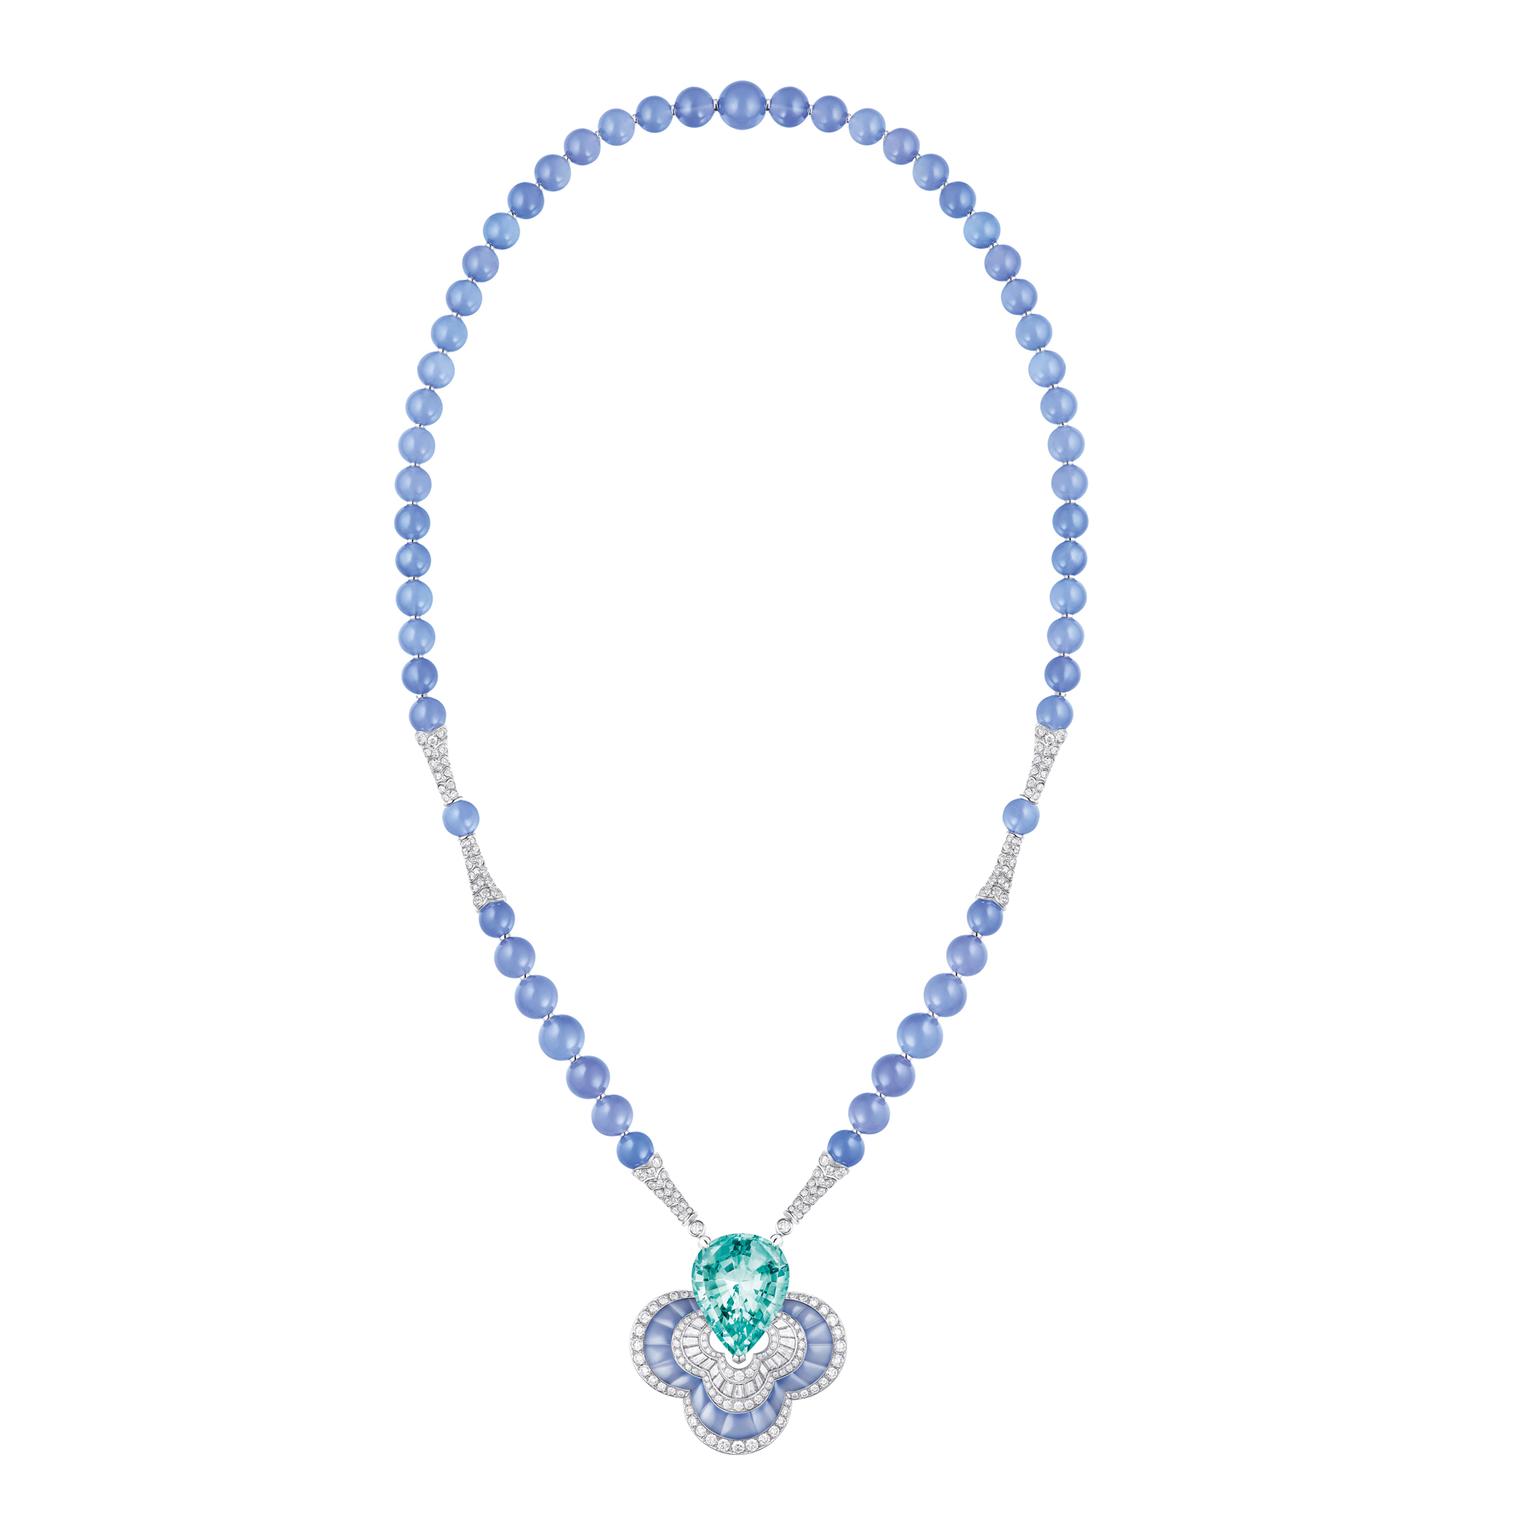 Louis Vuitton Blossom Beryl Chalcedony necklace